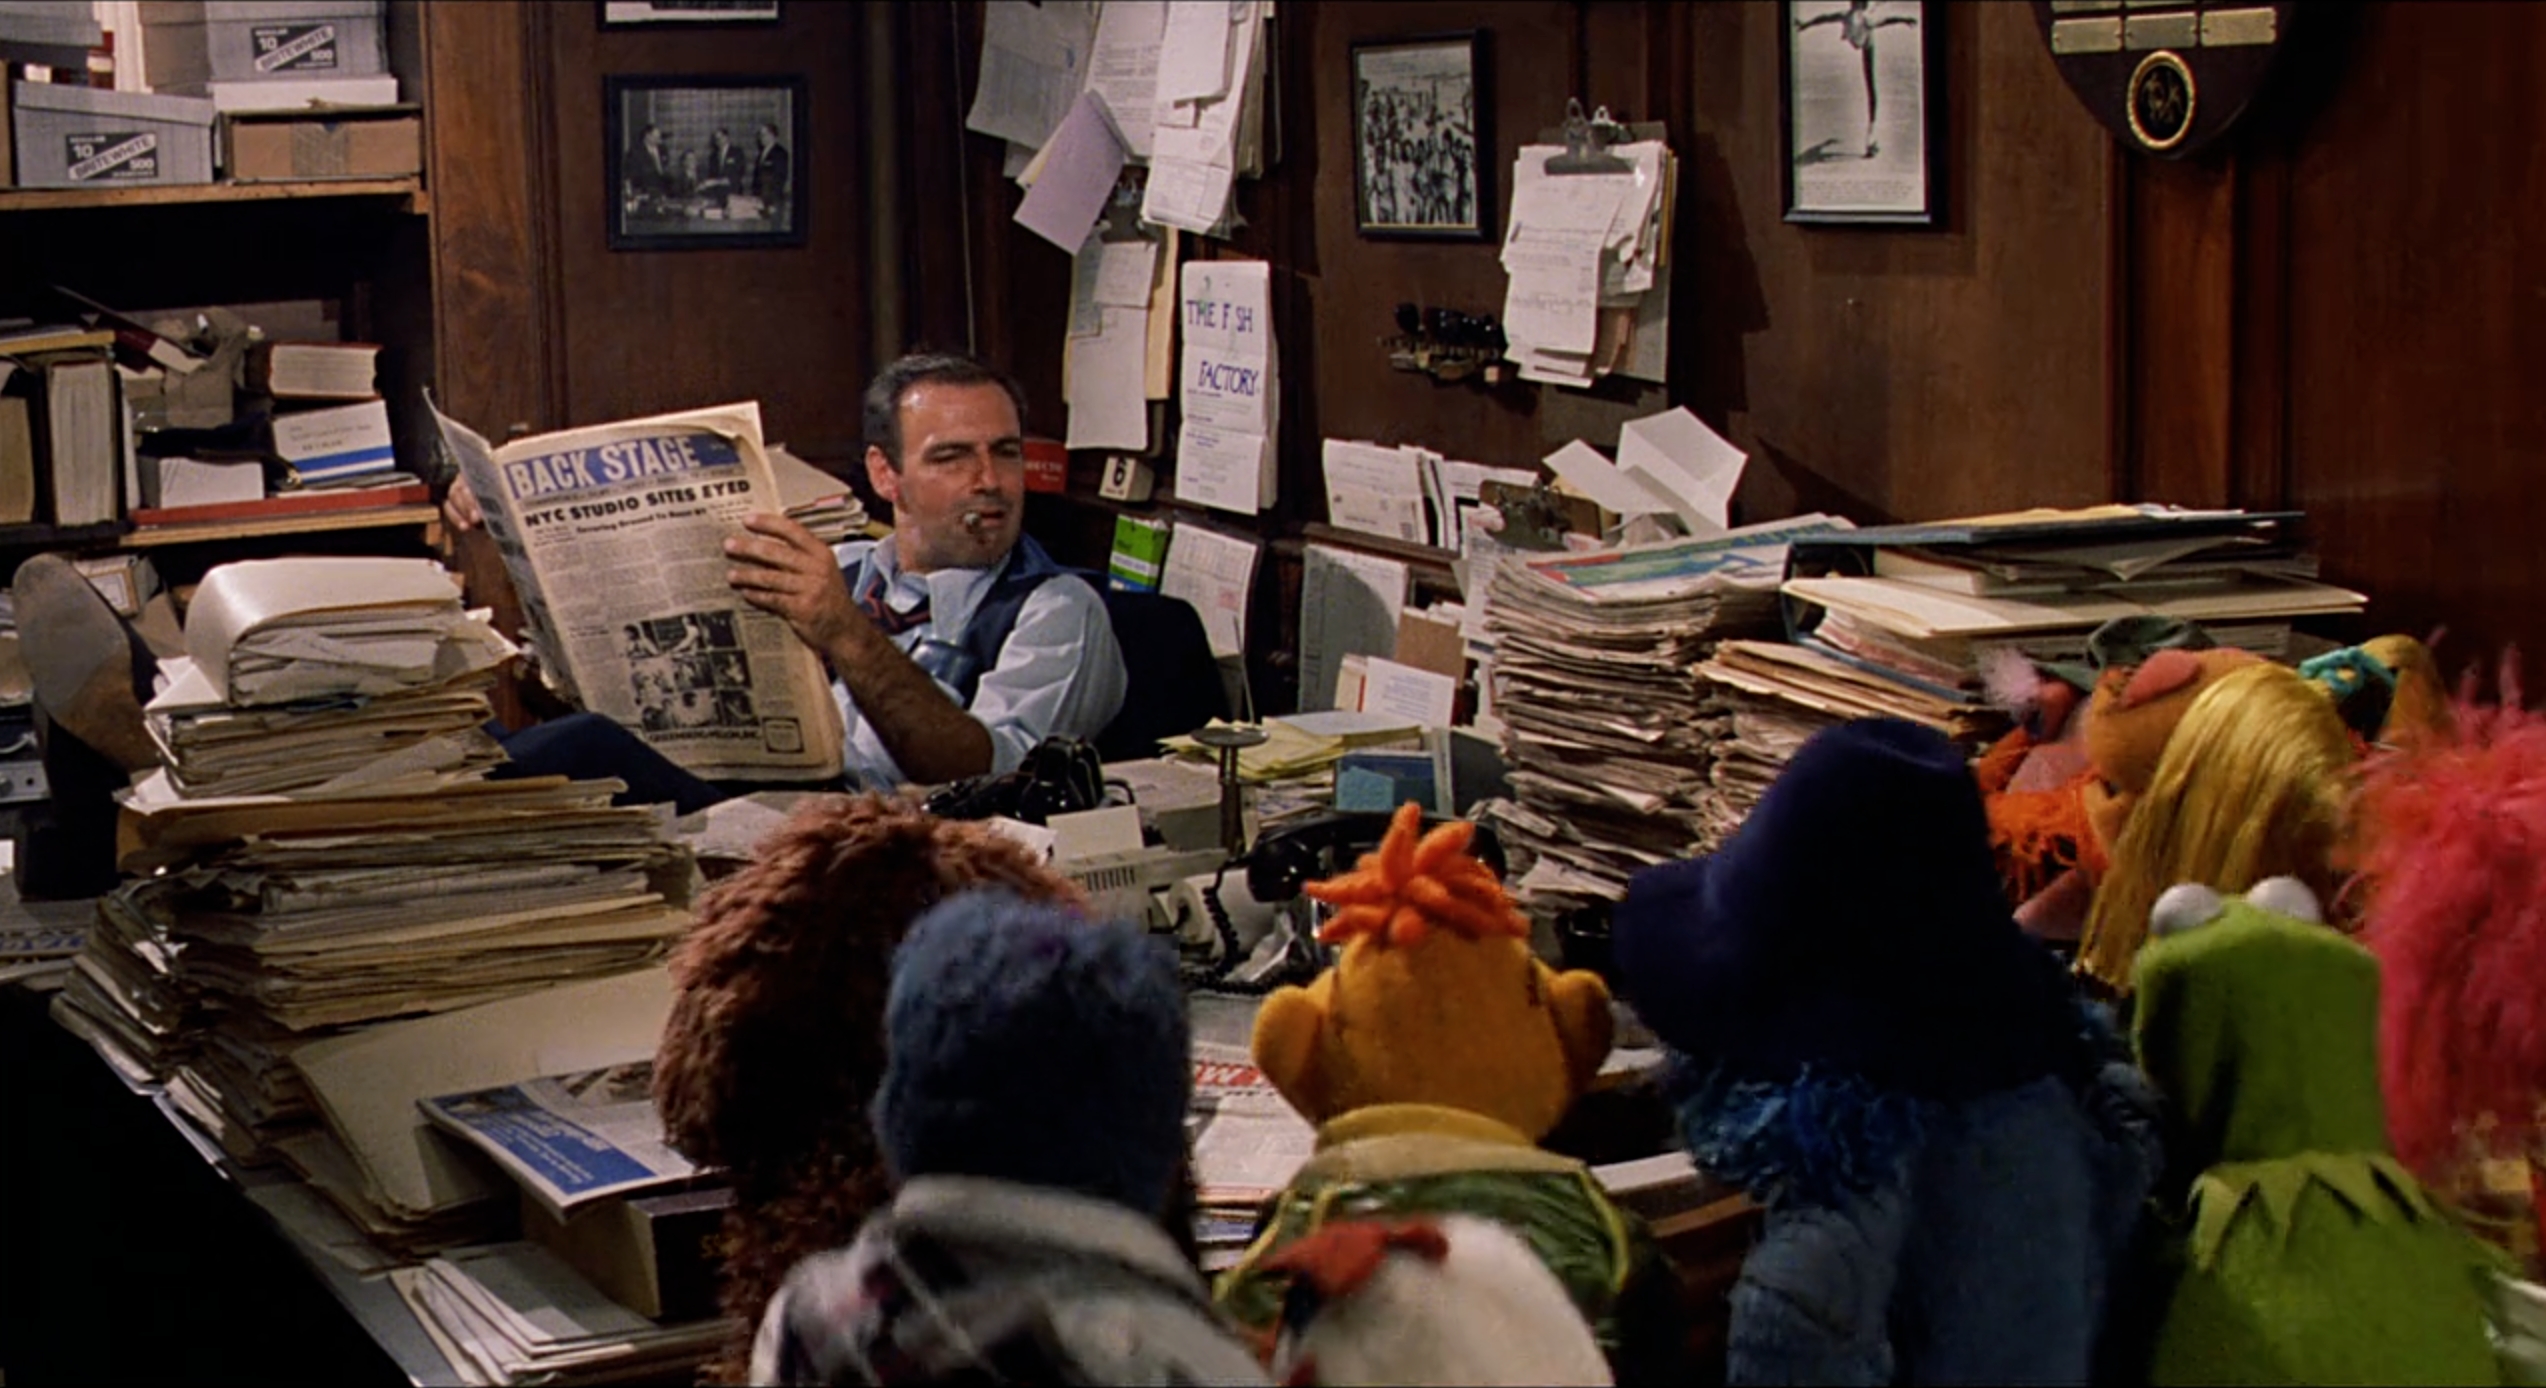 Backstage was featured in "The Muppets Take Manhattan"